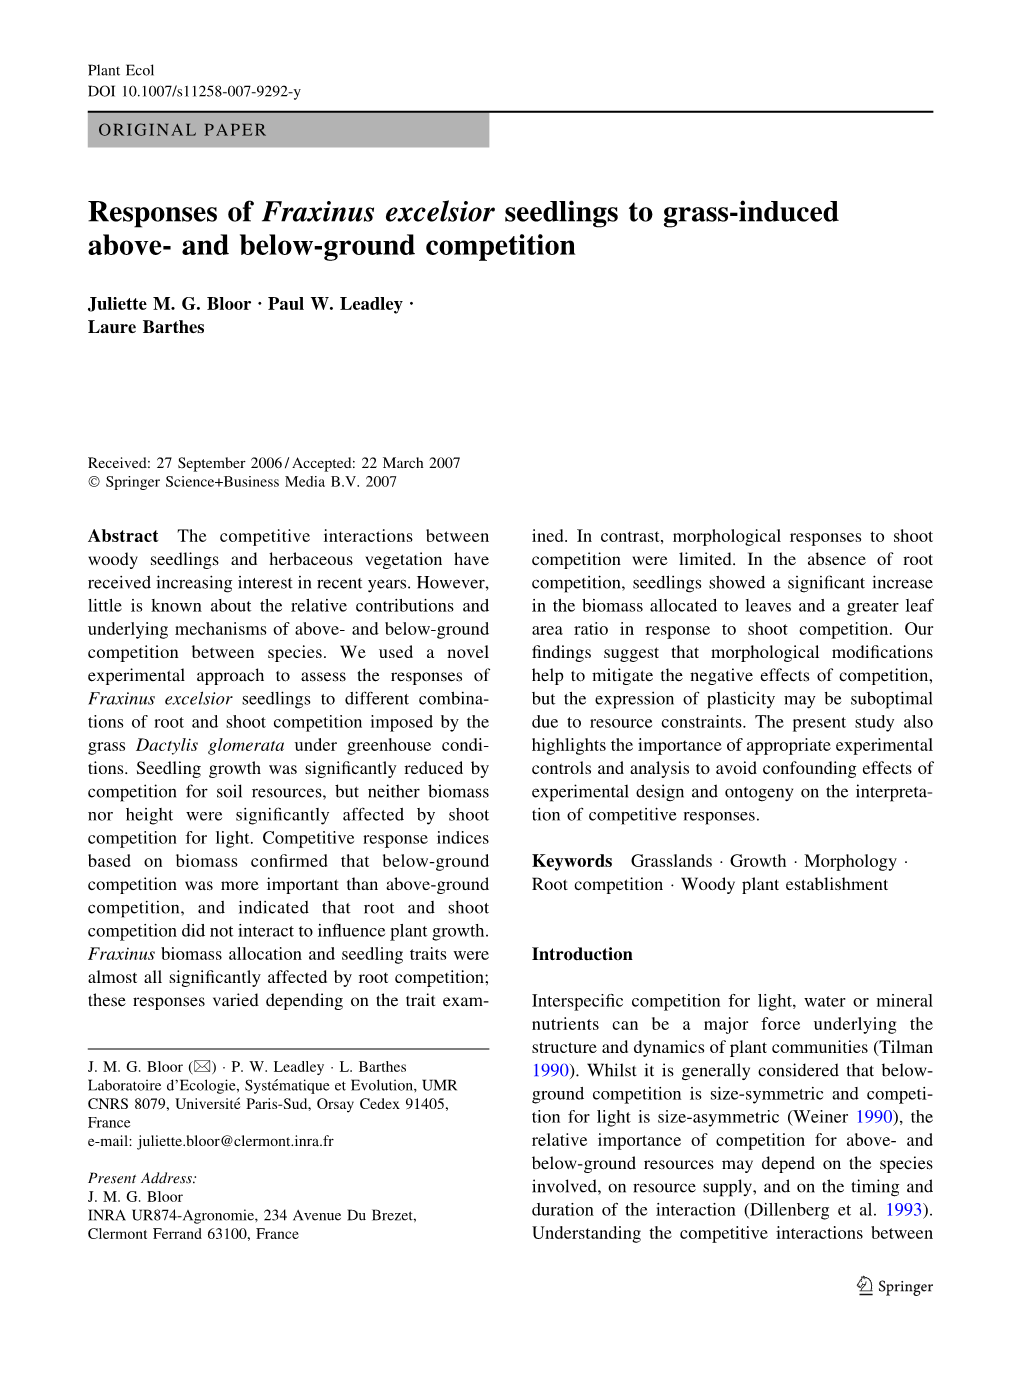 Responses of Fraxinus Excelsior Seedlings to Grass-Induced Above- and Below-Ground Competition